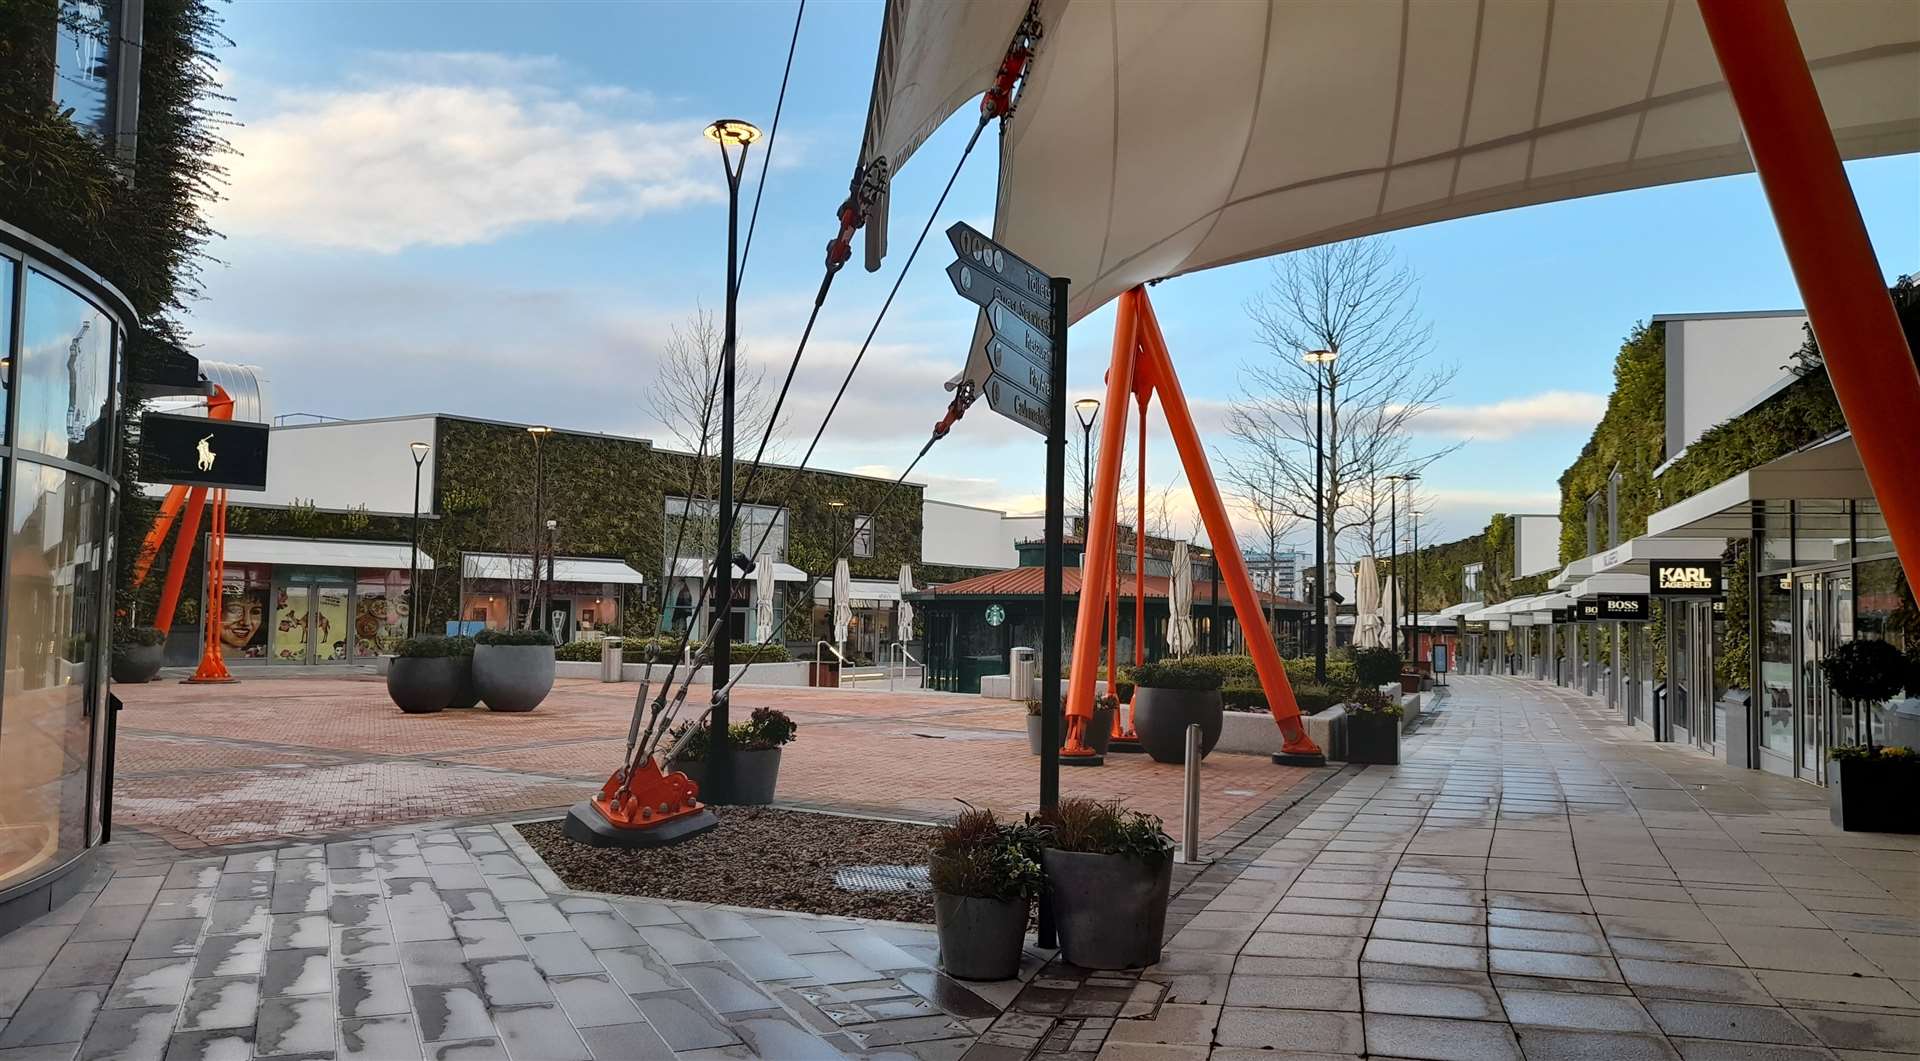 The Designer Outlet extension has been built on the former food court and part of the original car park